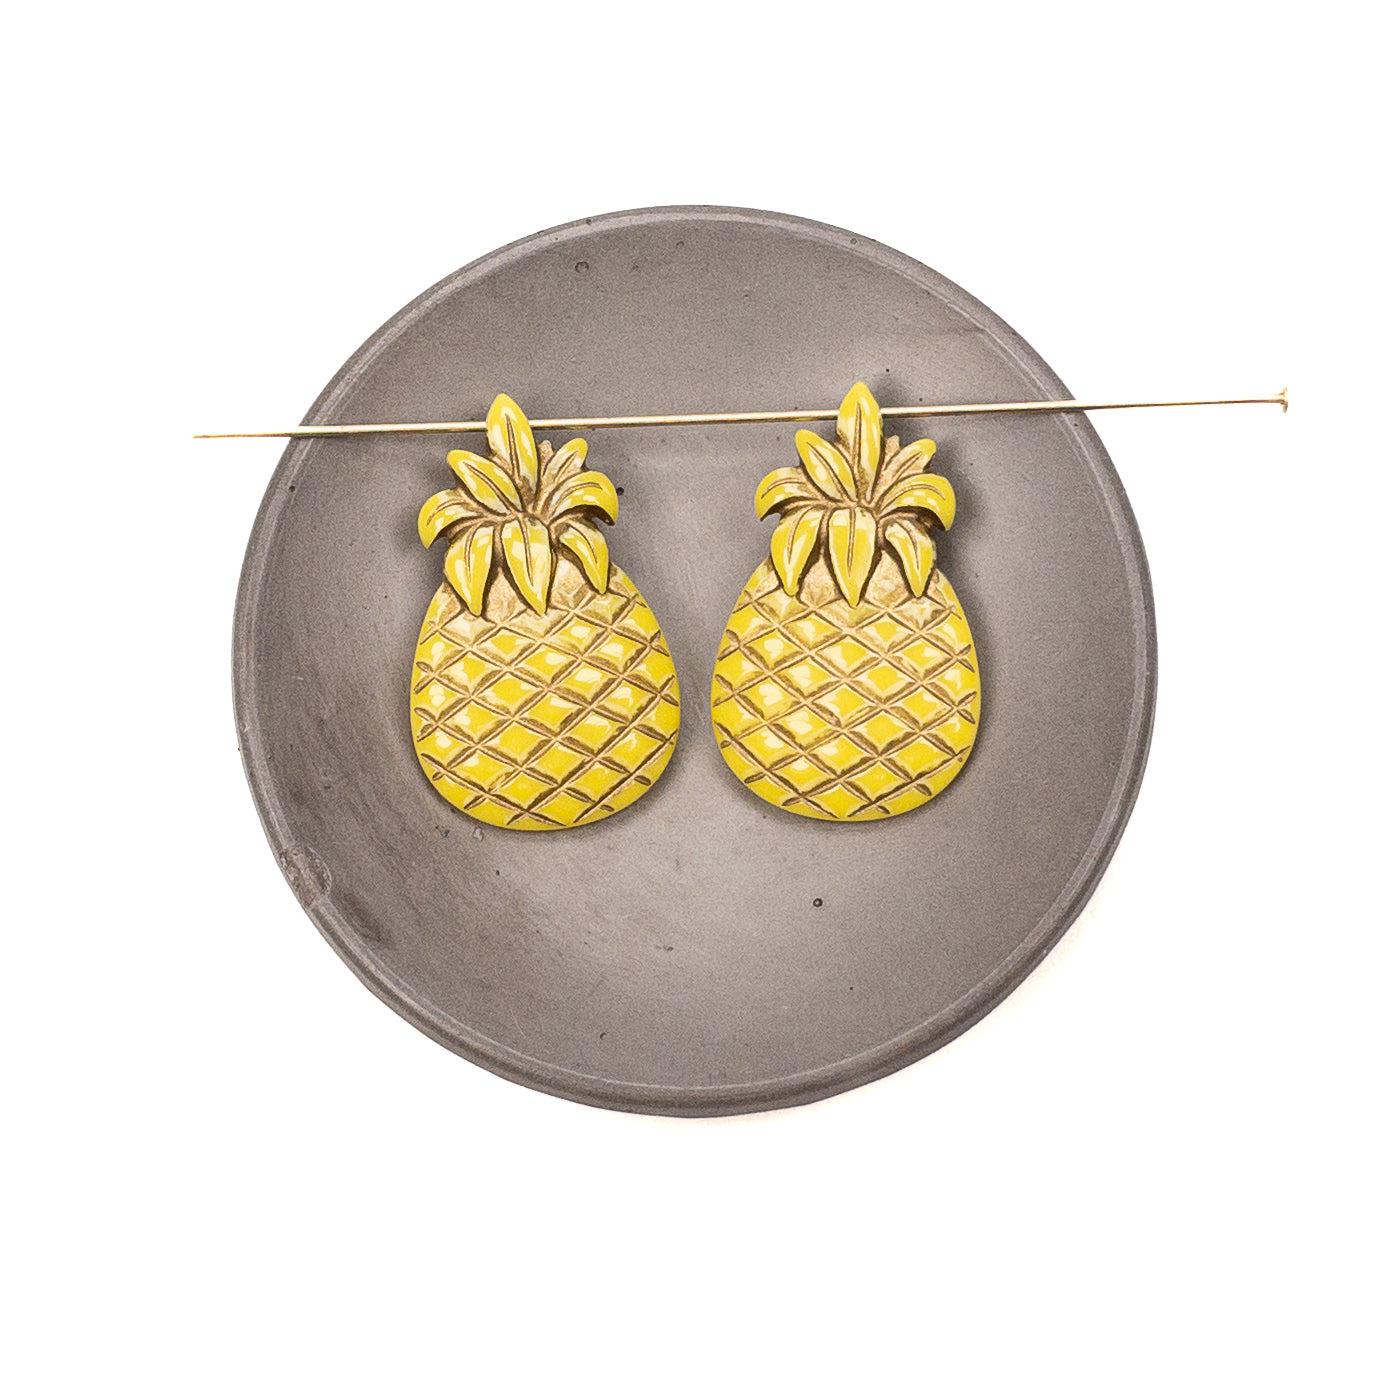 Resin Pineapple Beads With Gold Detail - 2 pc.